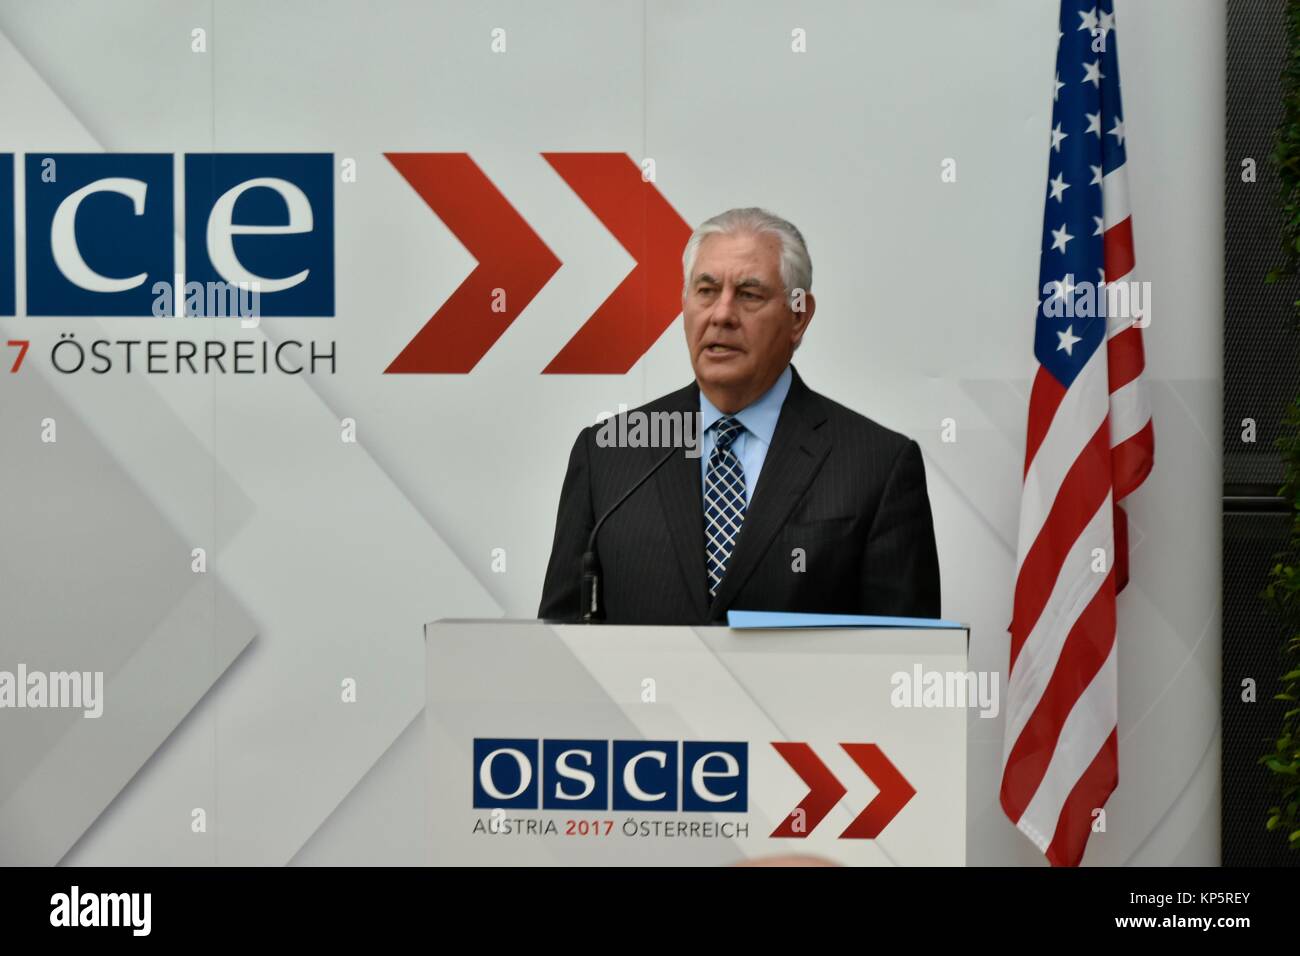 U.S. Secretary of State Rex Tillerson speaks during the Organization for Security and Co-operation in Europe (OSCE) Ministerial Council December 7, 2017 in Vienna, Austria.  (photo by State Department Photo via Planetpix) Stock Photo